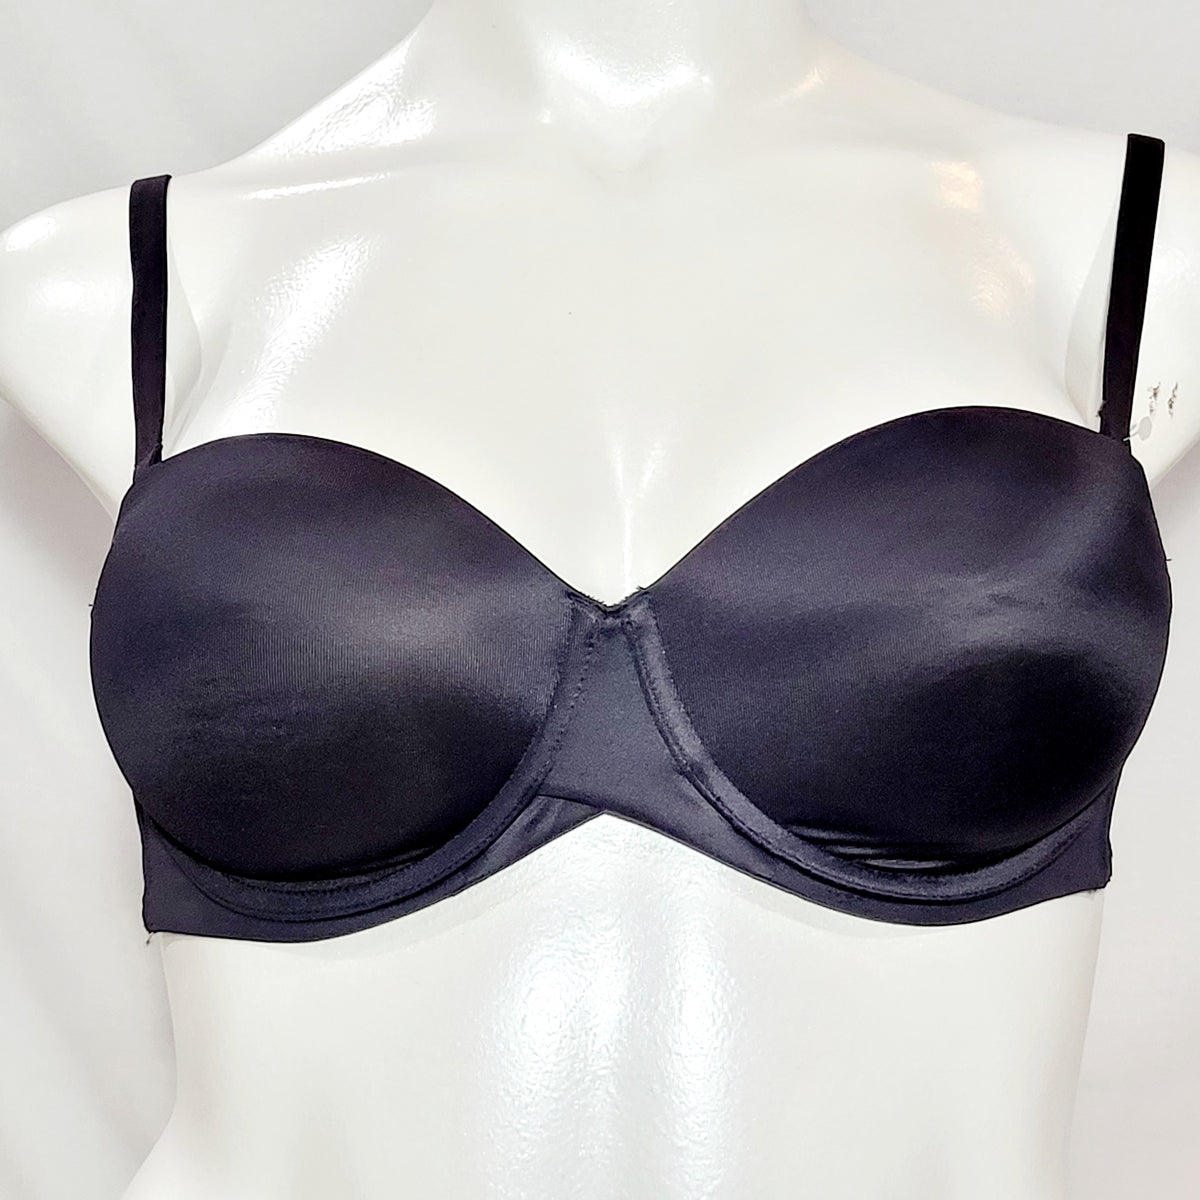 Maidenform SE6990 Self Expressions Stay Put Strapless